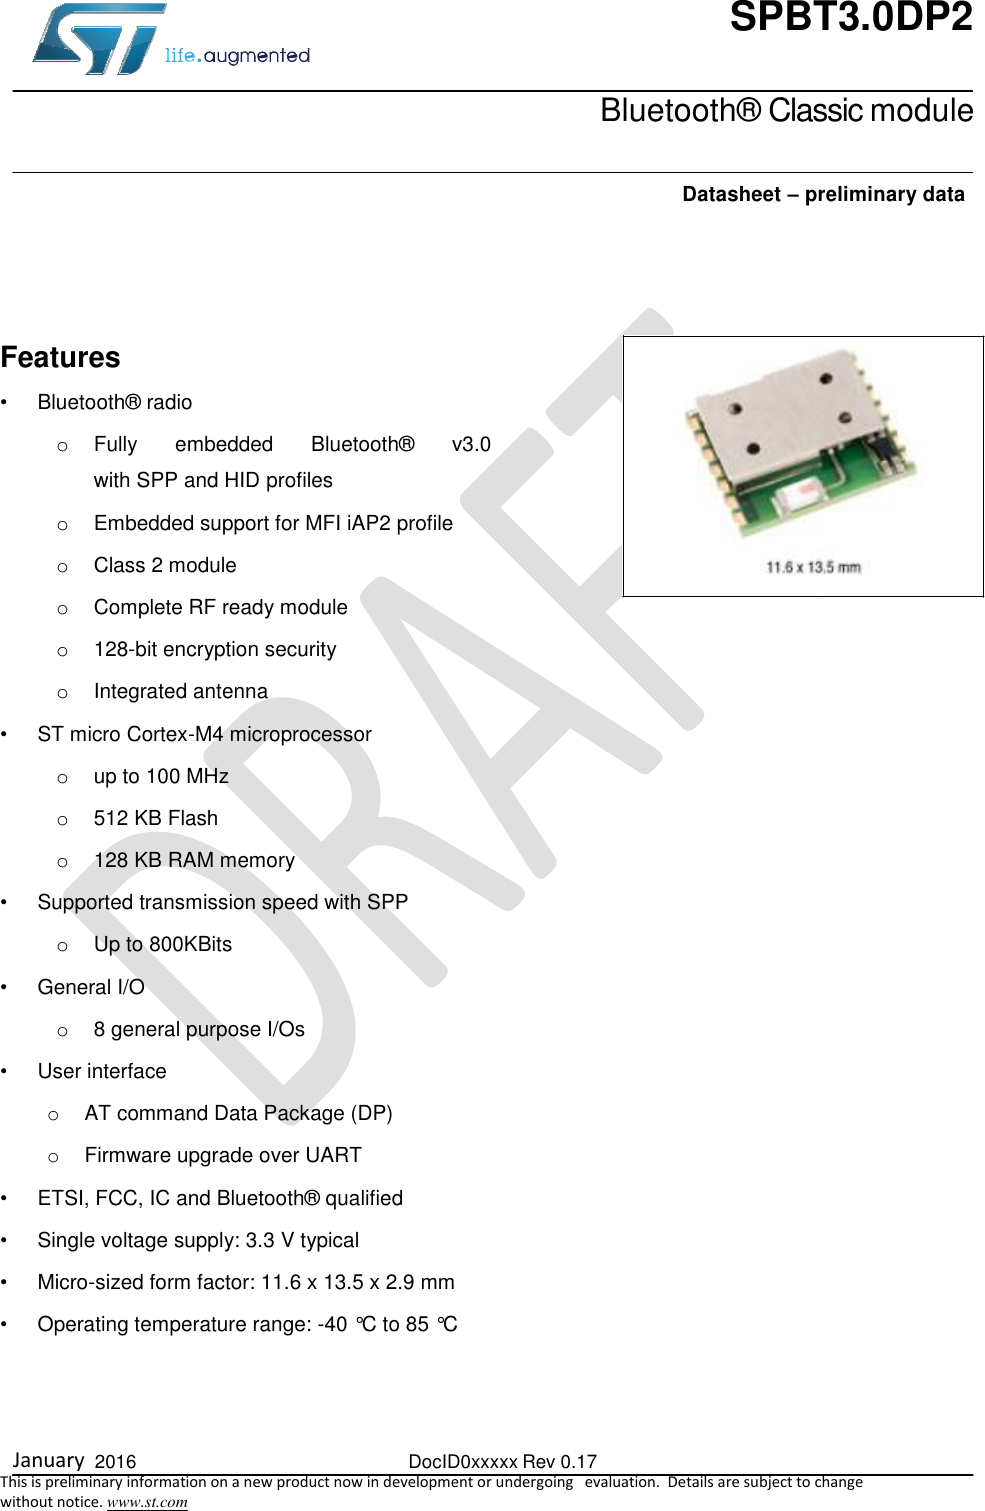  January  2016  DocID0xxxxx Rev 0.17   This is preliminary information on a new product now in development or undergoing   evaluation.  Details are subject to change  without notice. www.st.com SPBT3.0DP2    Bluetooth® Classic module    Datasheet – preliminary data  Features  •  Bluetooth® radio o  Fully  embedded  Bluetooth®  v3.0  with SPP and HID profiles o  Embedded support for MFI iAP2 profile o  Class 2 module o  Complete RF ready module o 128-bit encryption security o  Integrated antenna •  ST micro Cortex-M4 microprocessor  o  up to 100 MHz  o 512 KB Flash o  128 KB RAM memory •  Supported transmission speed with SPP o  Up to 800KBits •  General I/O o  8 general purpose I/Os •  User interface o  AT command Data Package (DP) o  Firmware upgrade over UART •  ETSI, FCC, IC and Bluetooth® qualified •  Single voltage supply: 3.3 V typical •  Micro-sized form factor: 11.6 x 13.5 x 2.9 mm •  Operating temperature range: -40 °C to 85 °C    